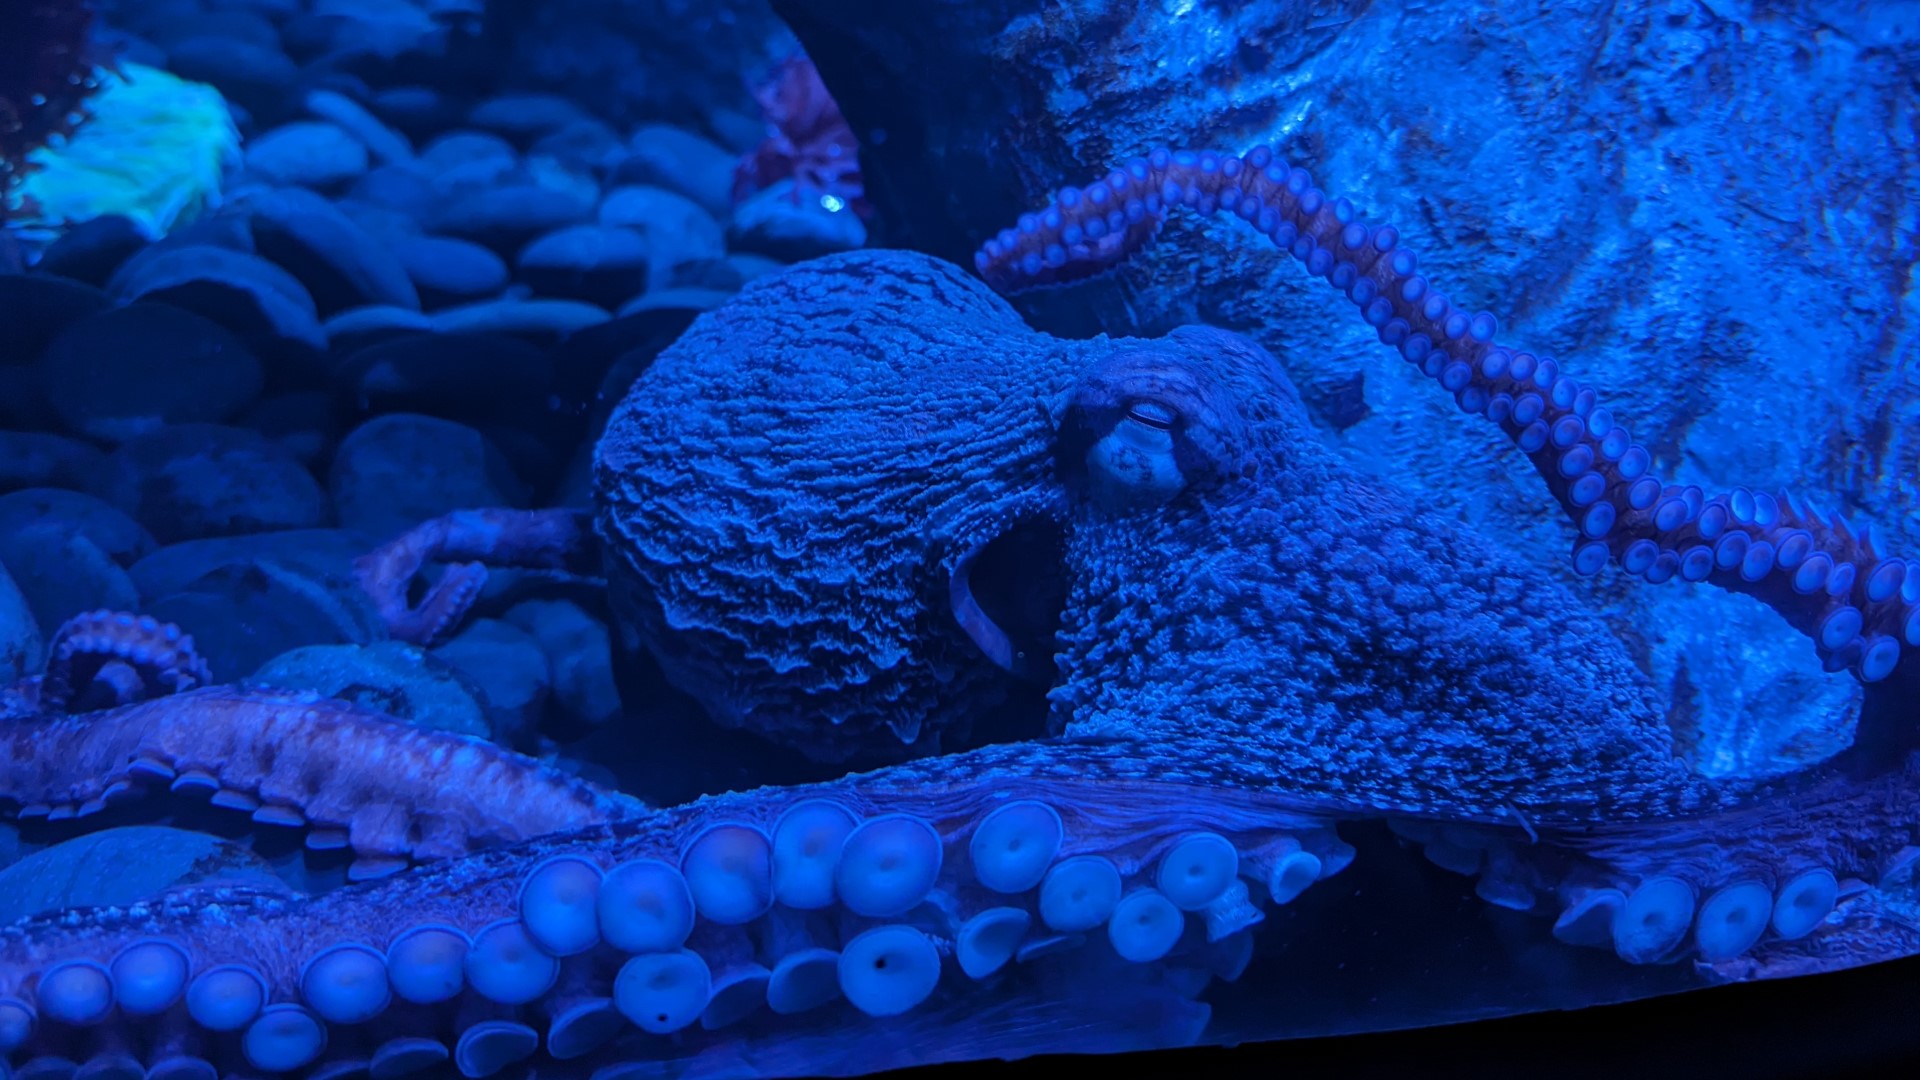 Susan, a Giant Pacific Octopus, is now on display in Riverbanks Zoo's new Darnall W. and Susan F. Boyd Aquarium and Reptile Conservation Center (ARCC).